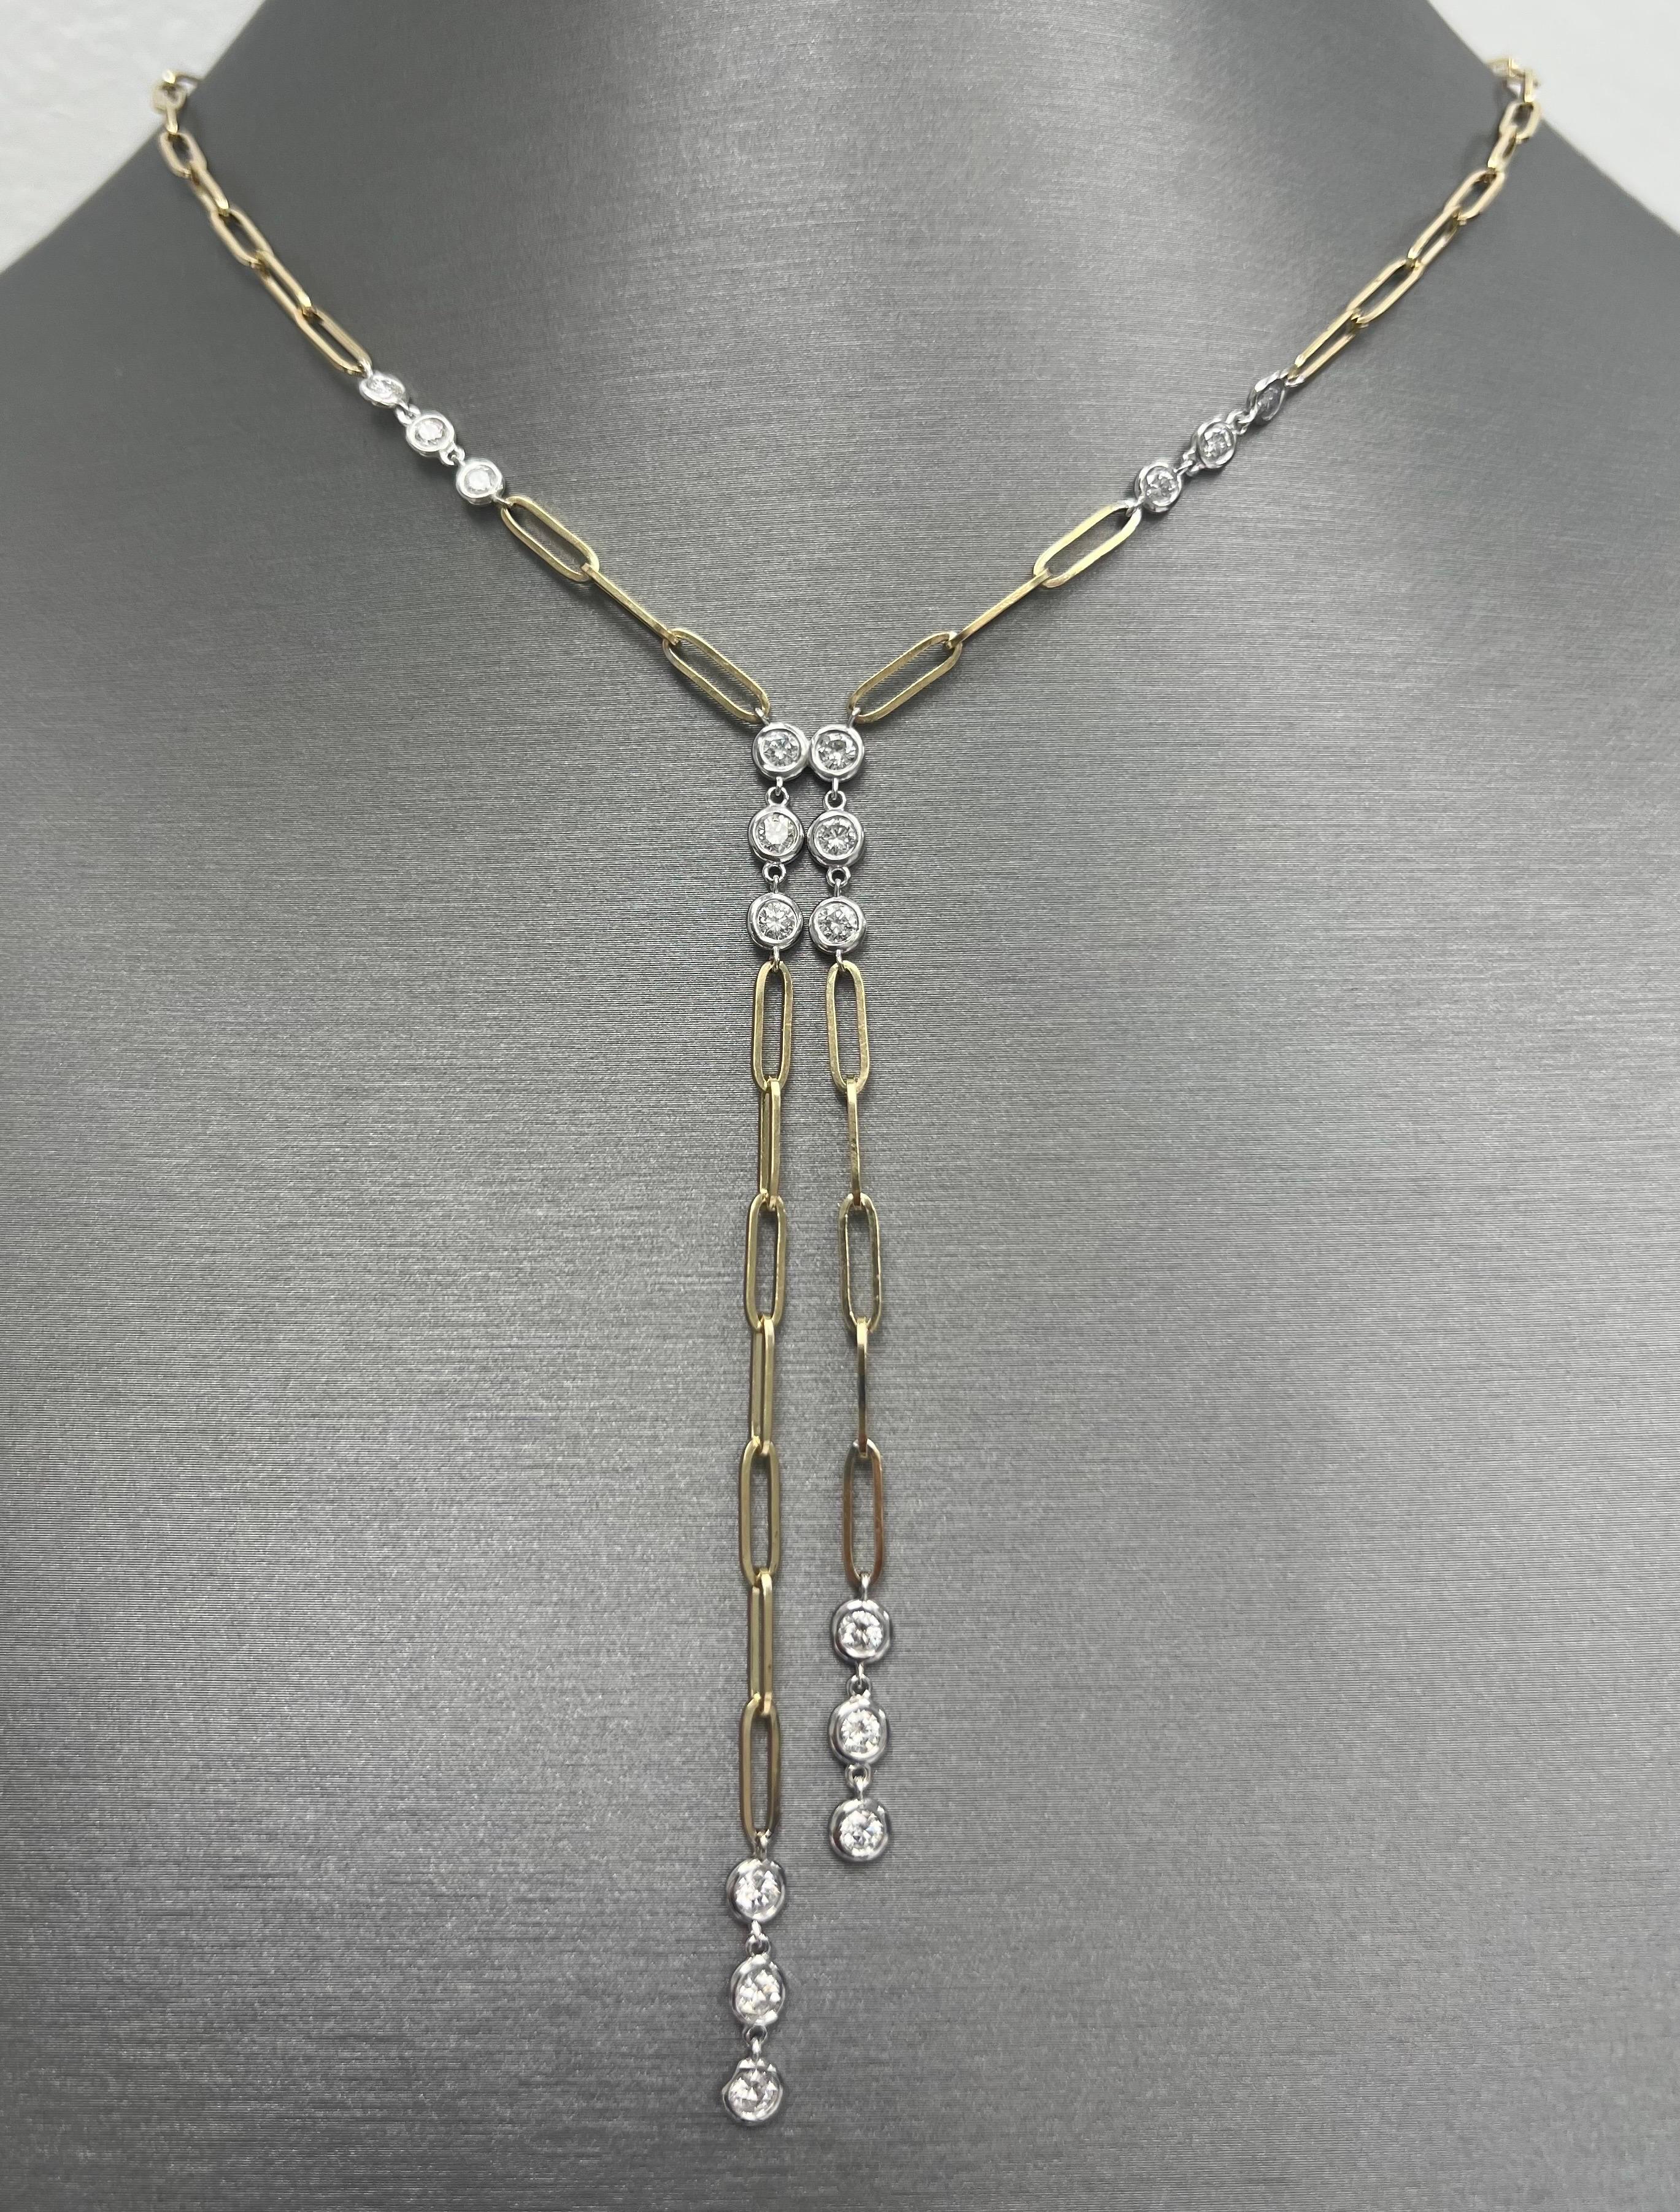 Round Cut 14K Two-Tone Gold Diamonds by the yard with Paper-Clip Chain/Necklace, 2CTW Diam For Sale